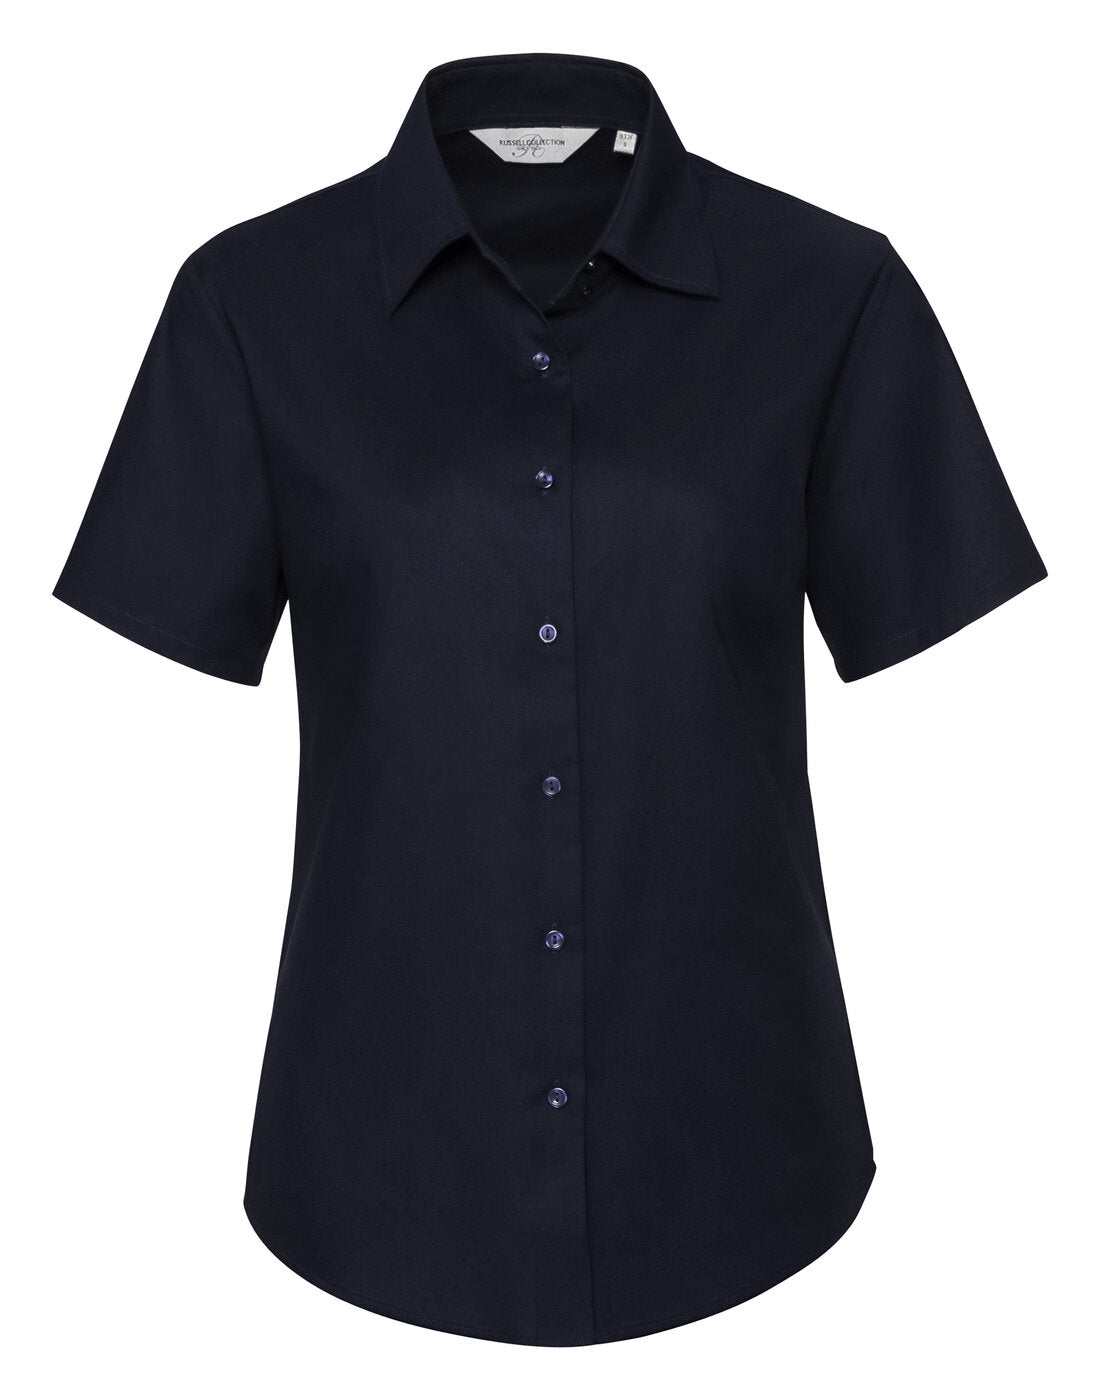 Russell Ladies Short Sleeve Tailored Oxford Shirt Bright Navy